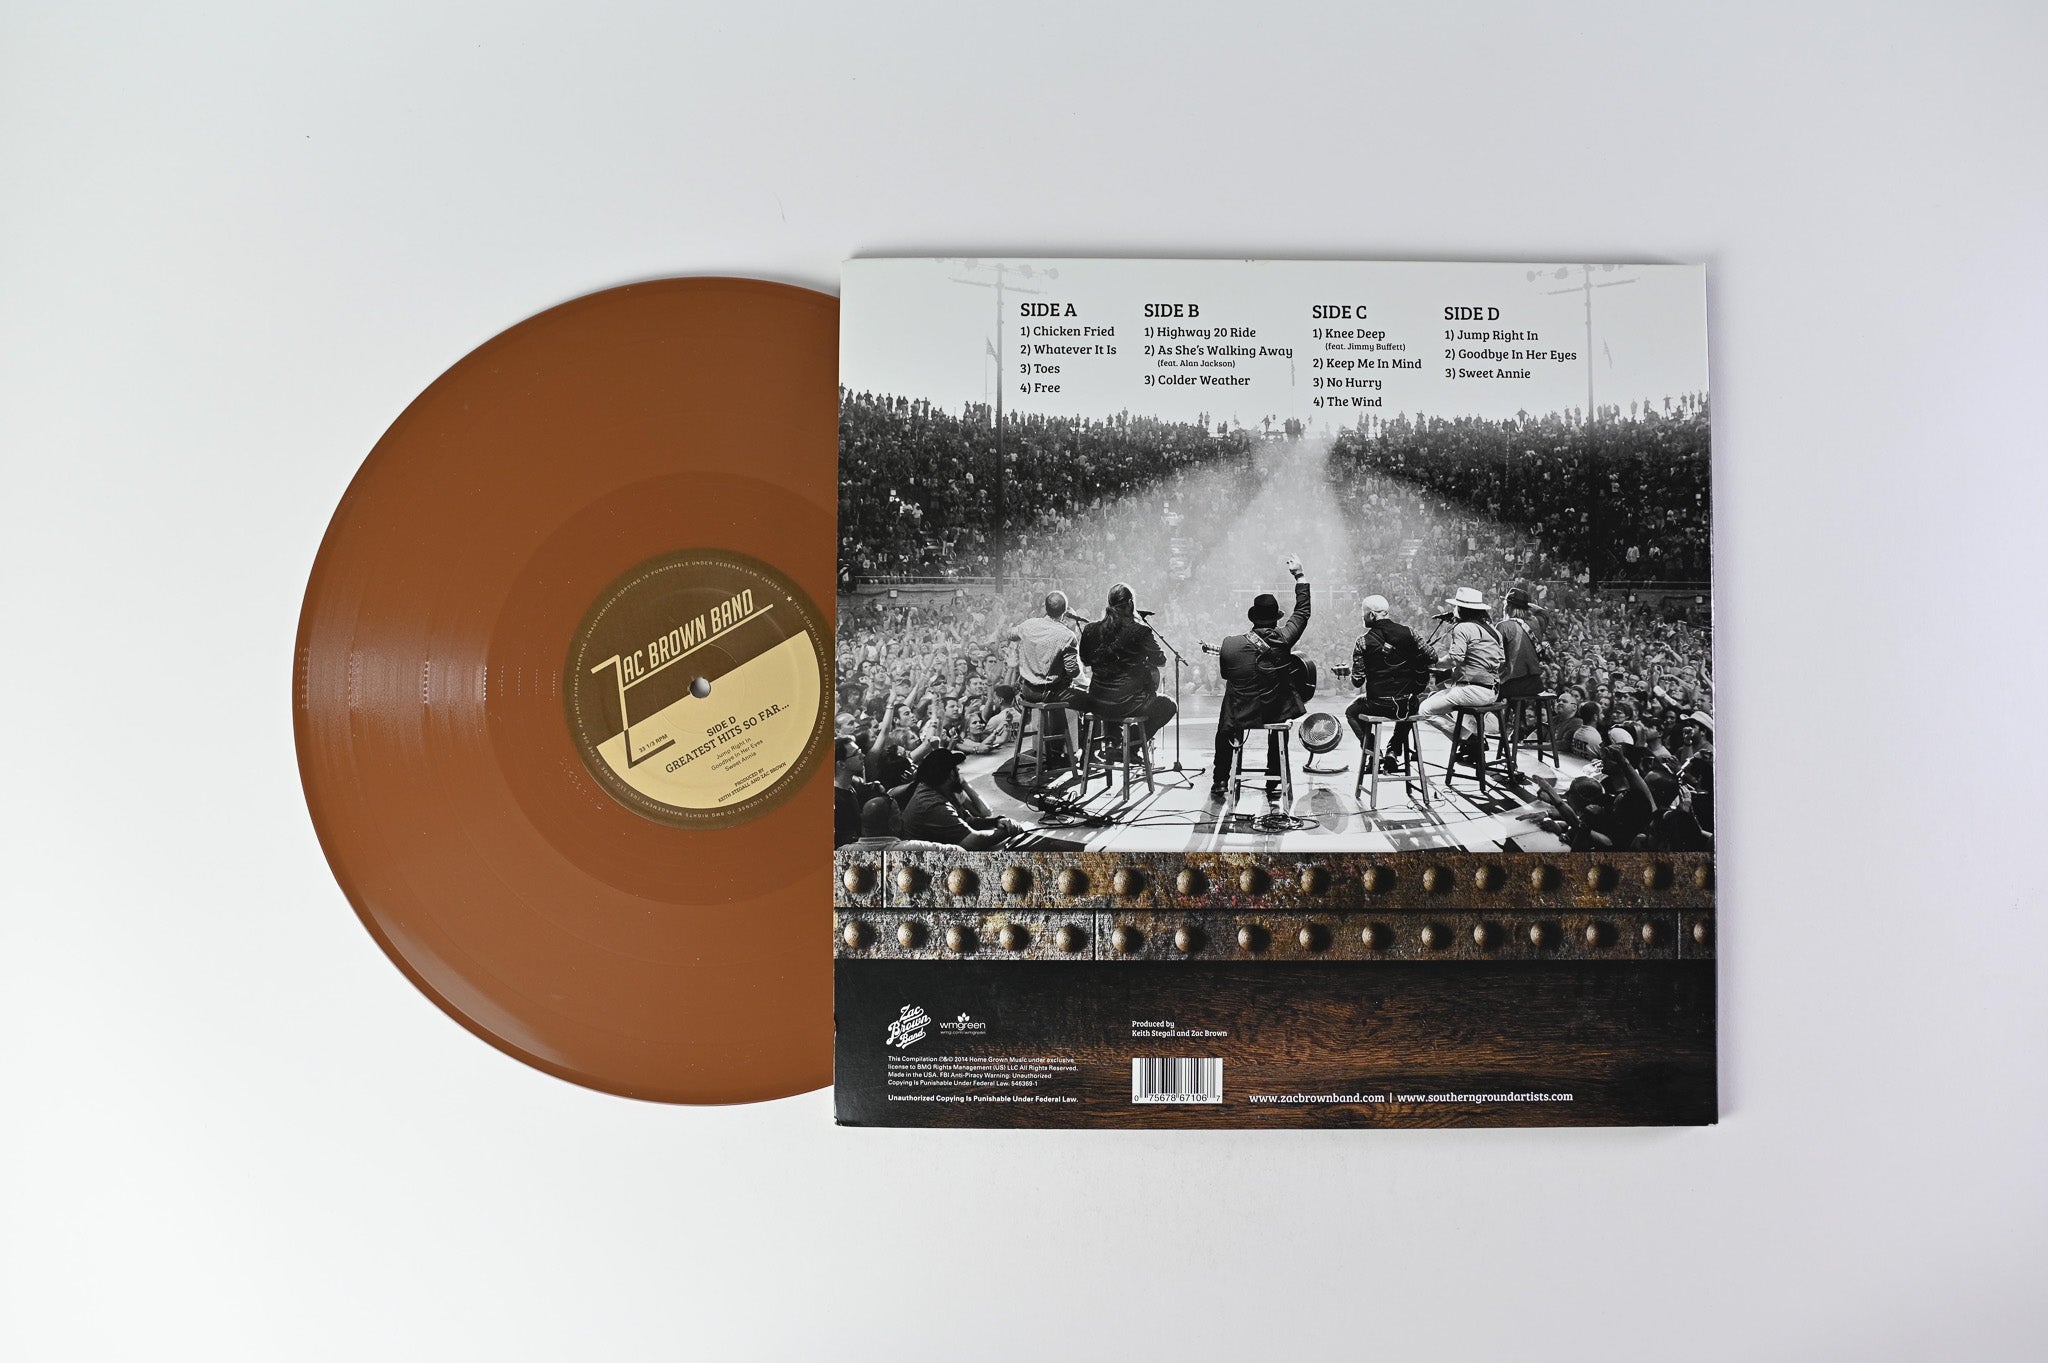 Zac Brown Band - Greatest Hits So Far on Southern Ground Artists Ltd Walnut Brown Reissue